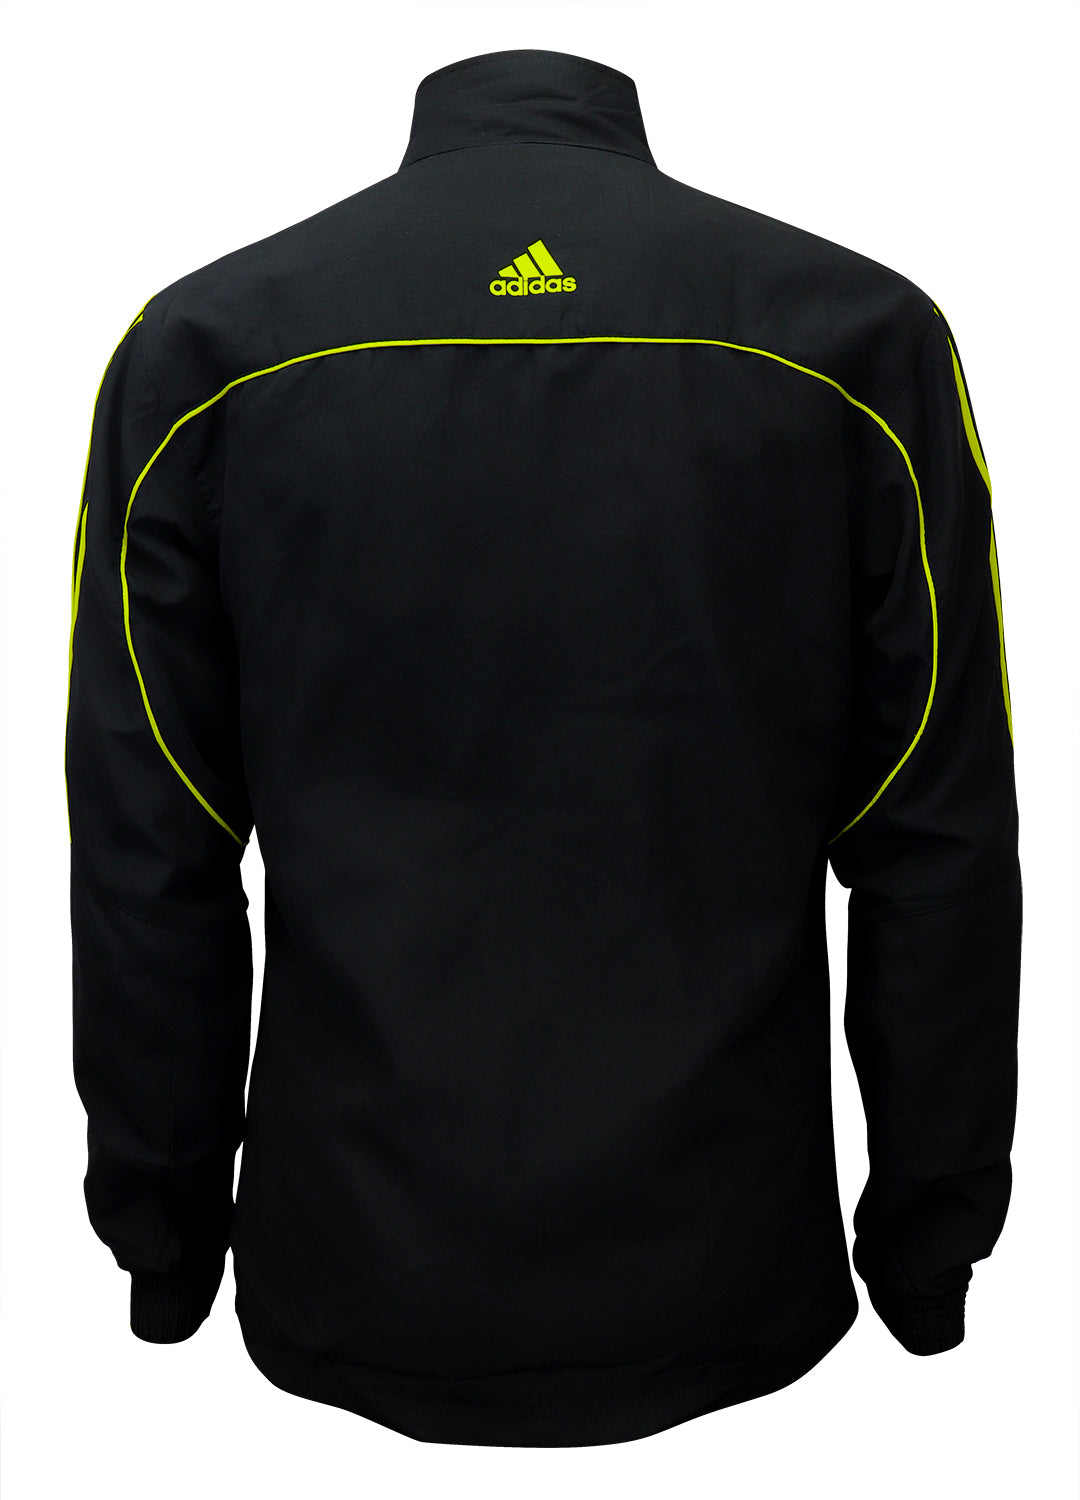 adidas Black with Neon Green Stripes Windbreaker Style Team Jacket Back View